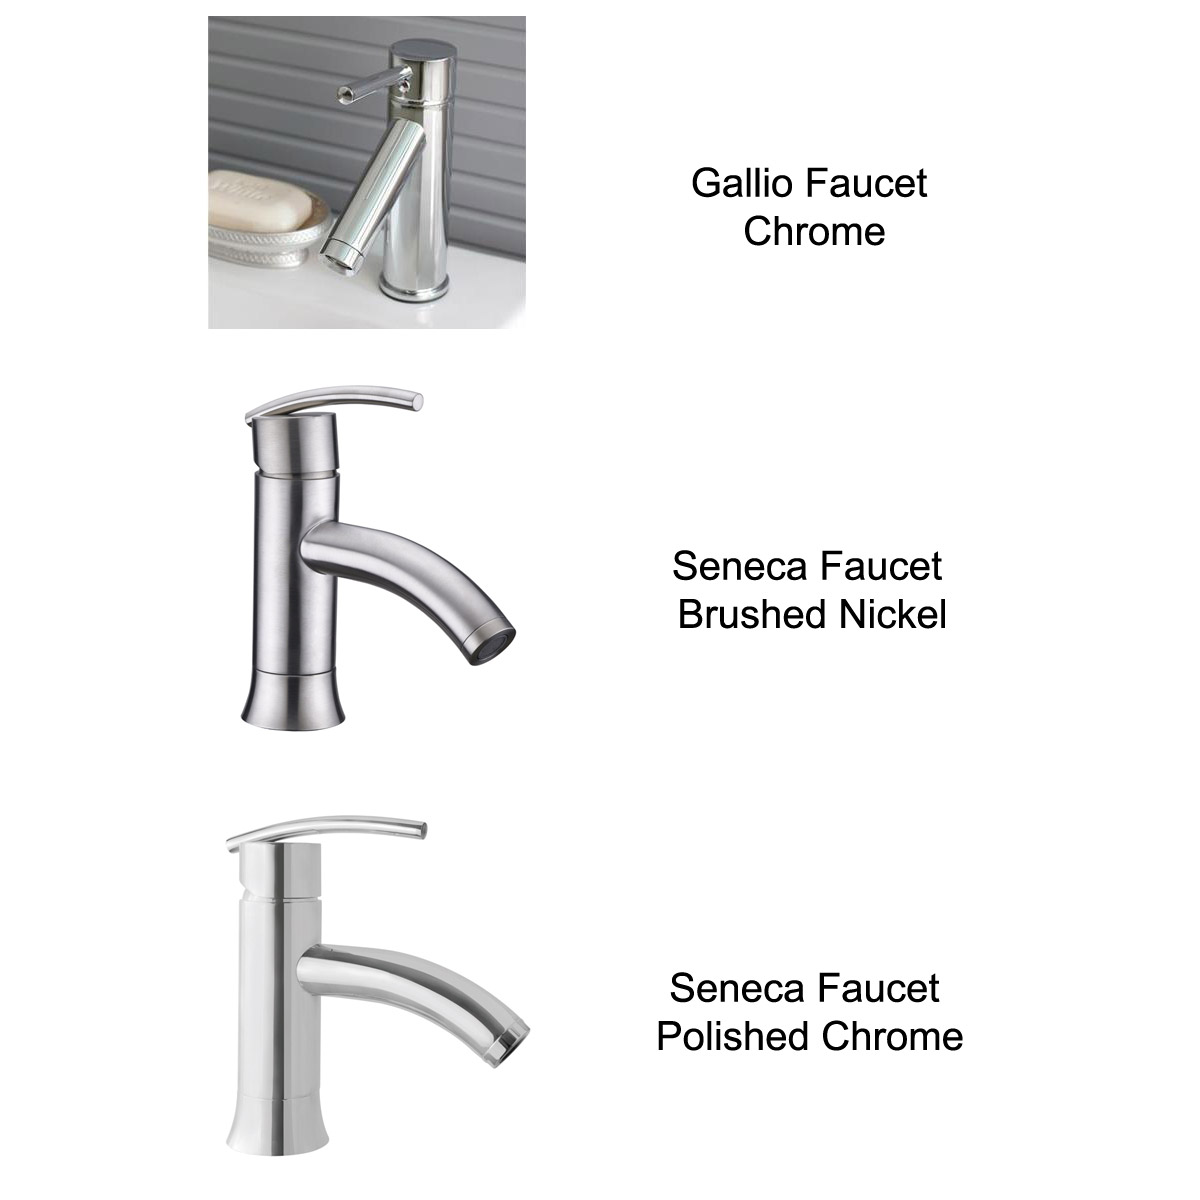 Optional Faucets